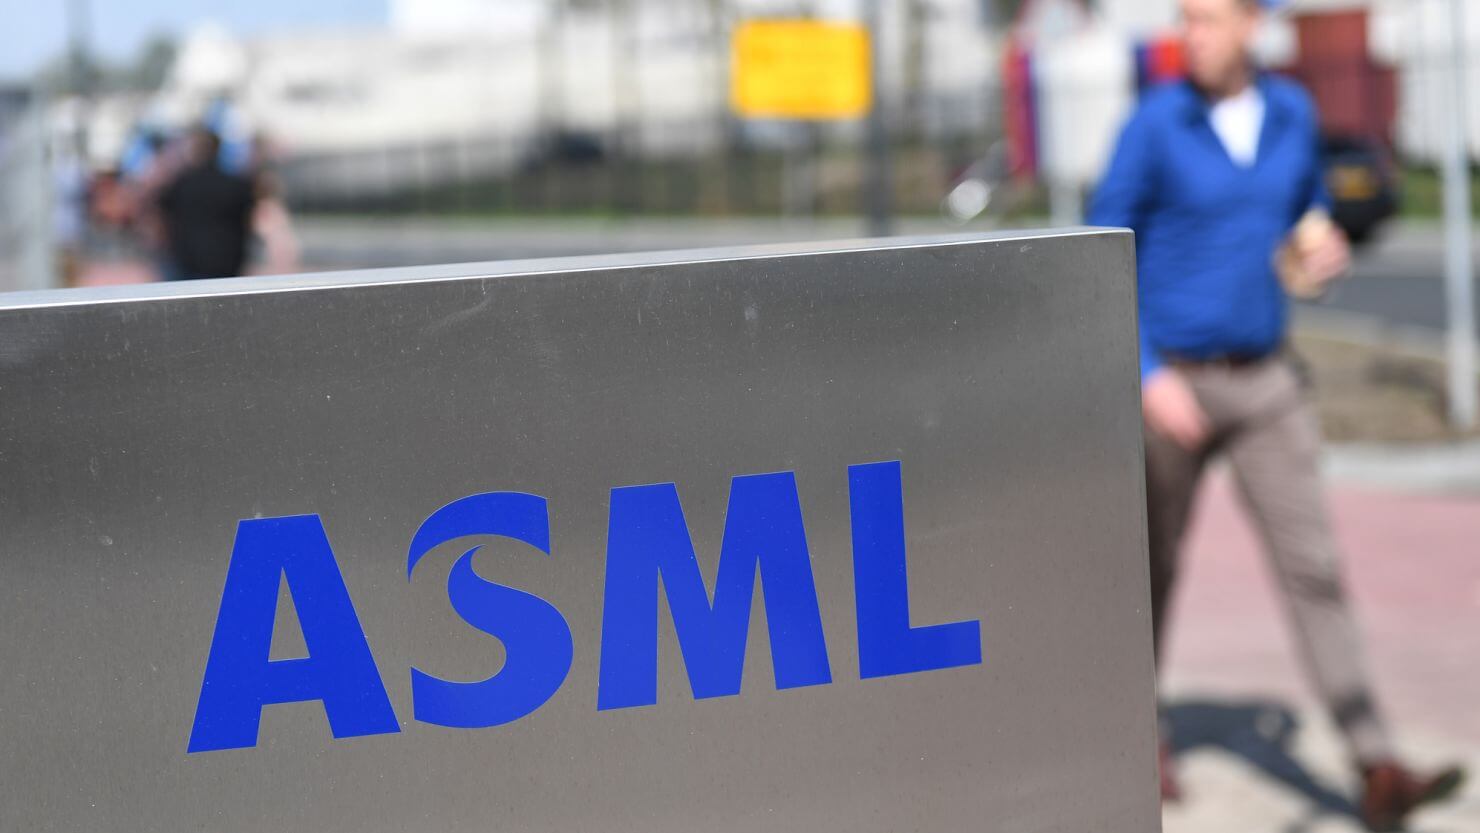 The Netherlands Limits ASML Chip Equipment Exports to China Due to U.S. Pressures